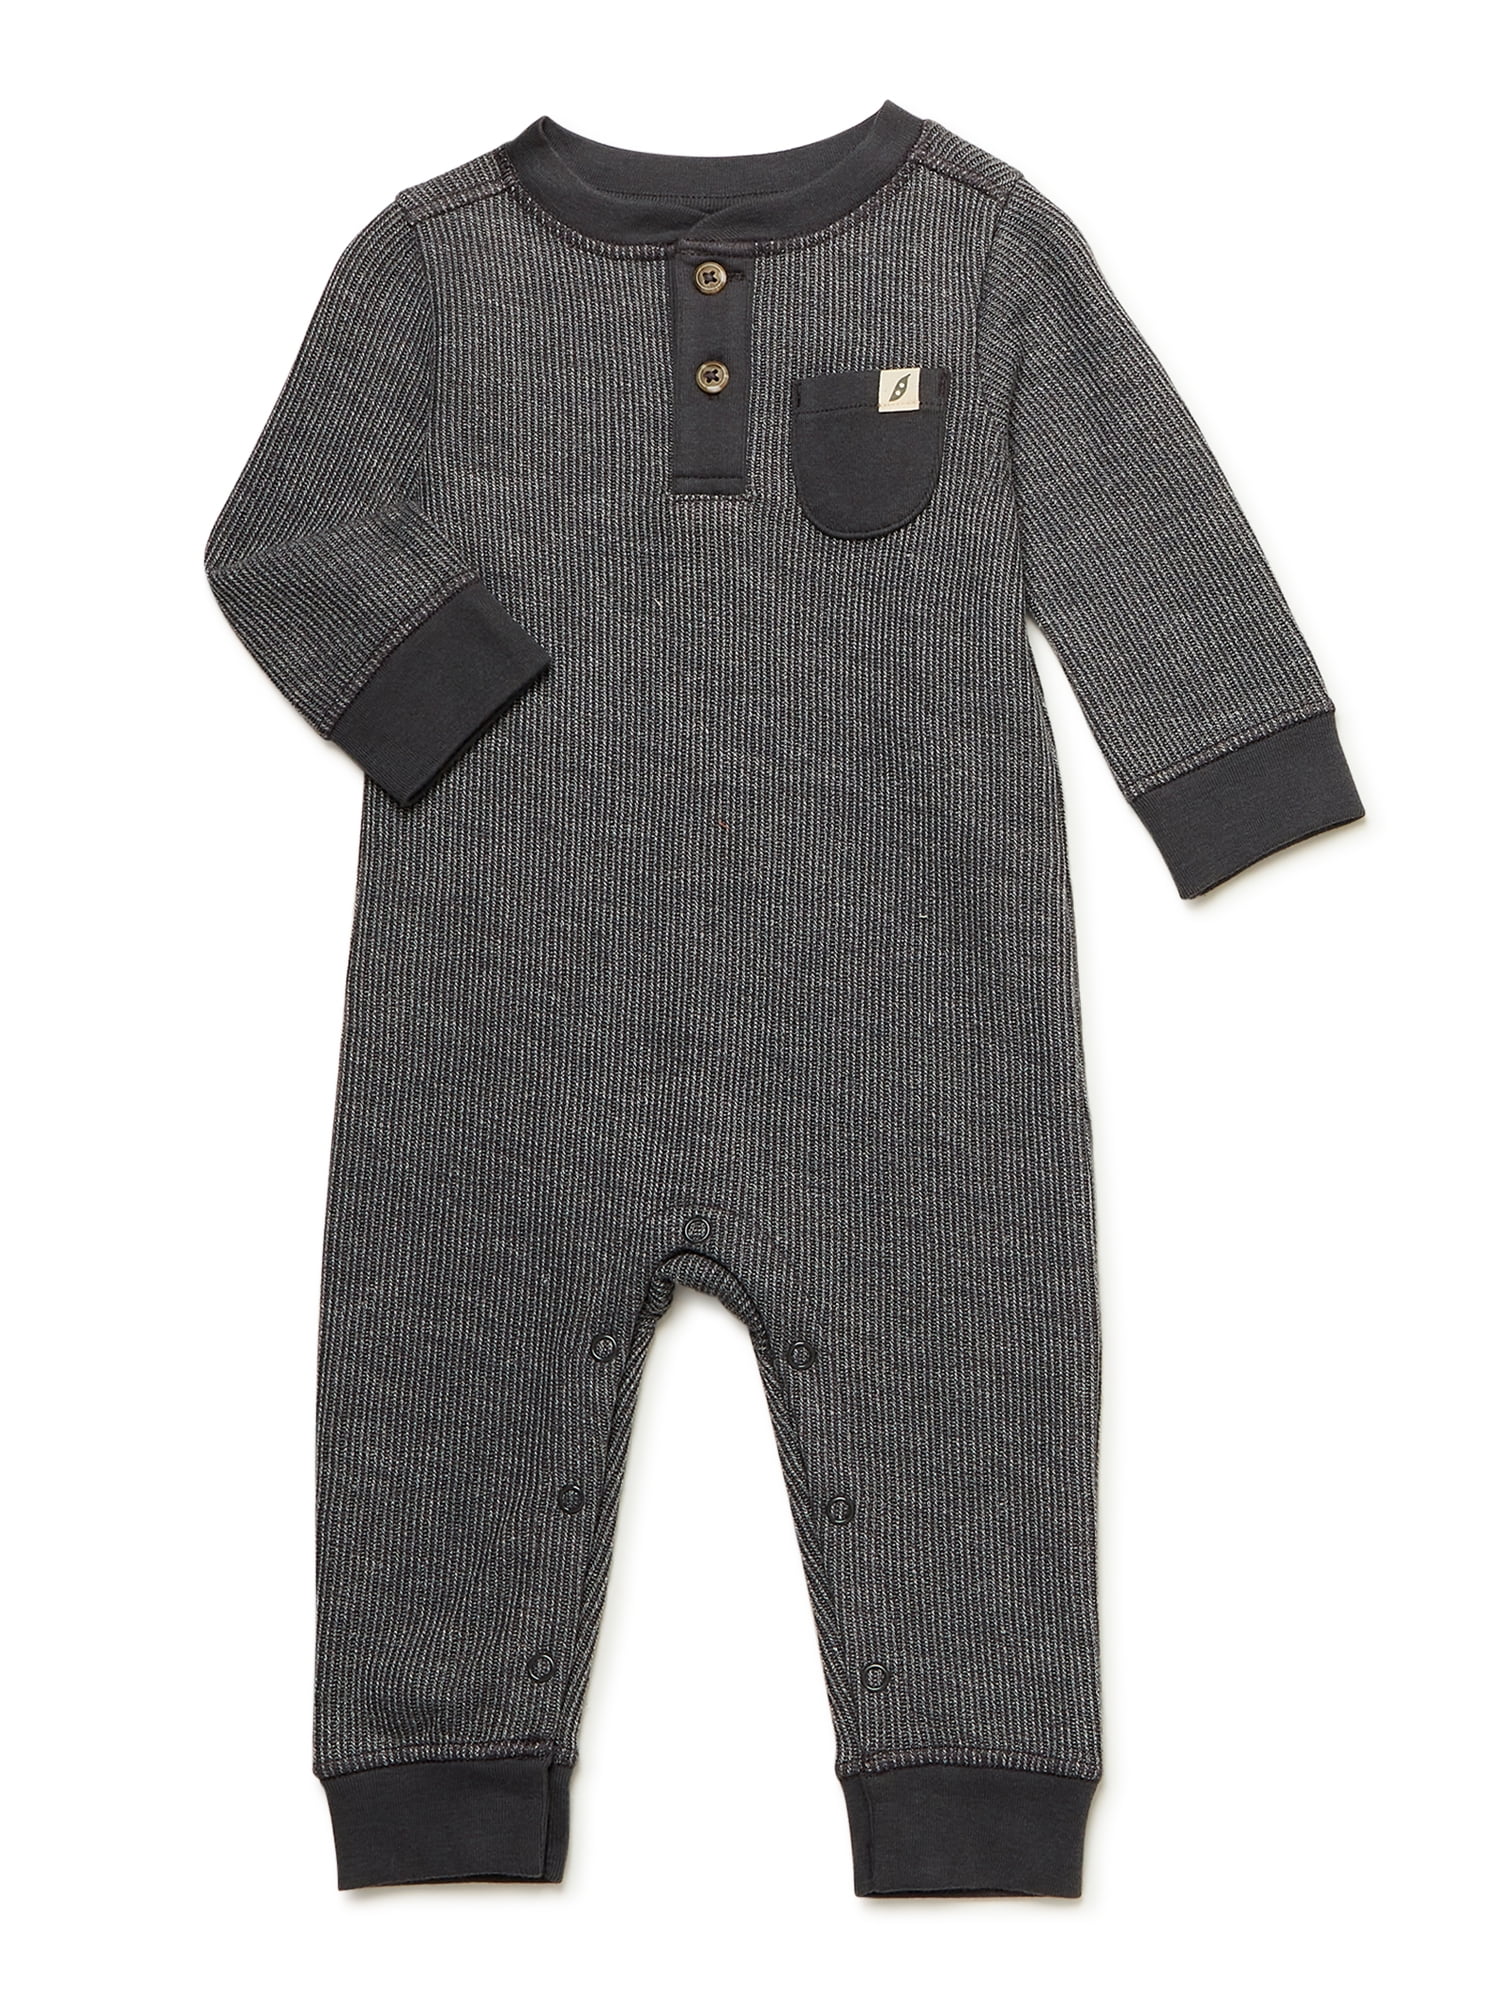 easy-peasy Baby Solid Romper, Sizes 0/3-24 Months